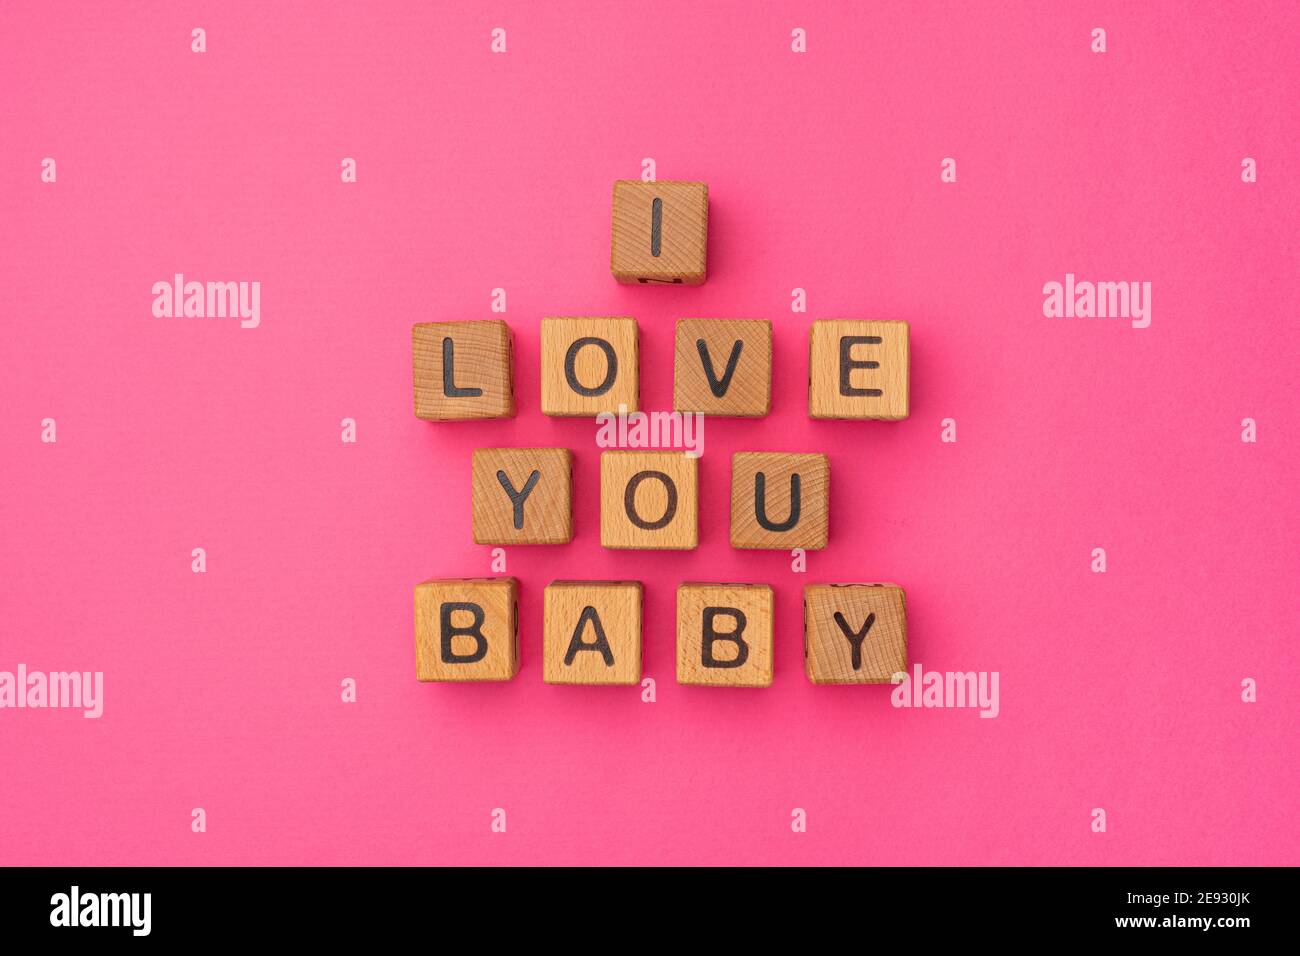 Wooden Cubes With The Phrase I Love You Baby On An Empty Colorful Pink Background Words Of Love Are Made Of Letters From Wood For Your Girlfriend Boyfriend Wife Husband For Valentine S